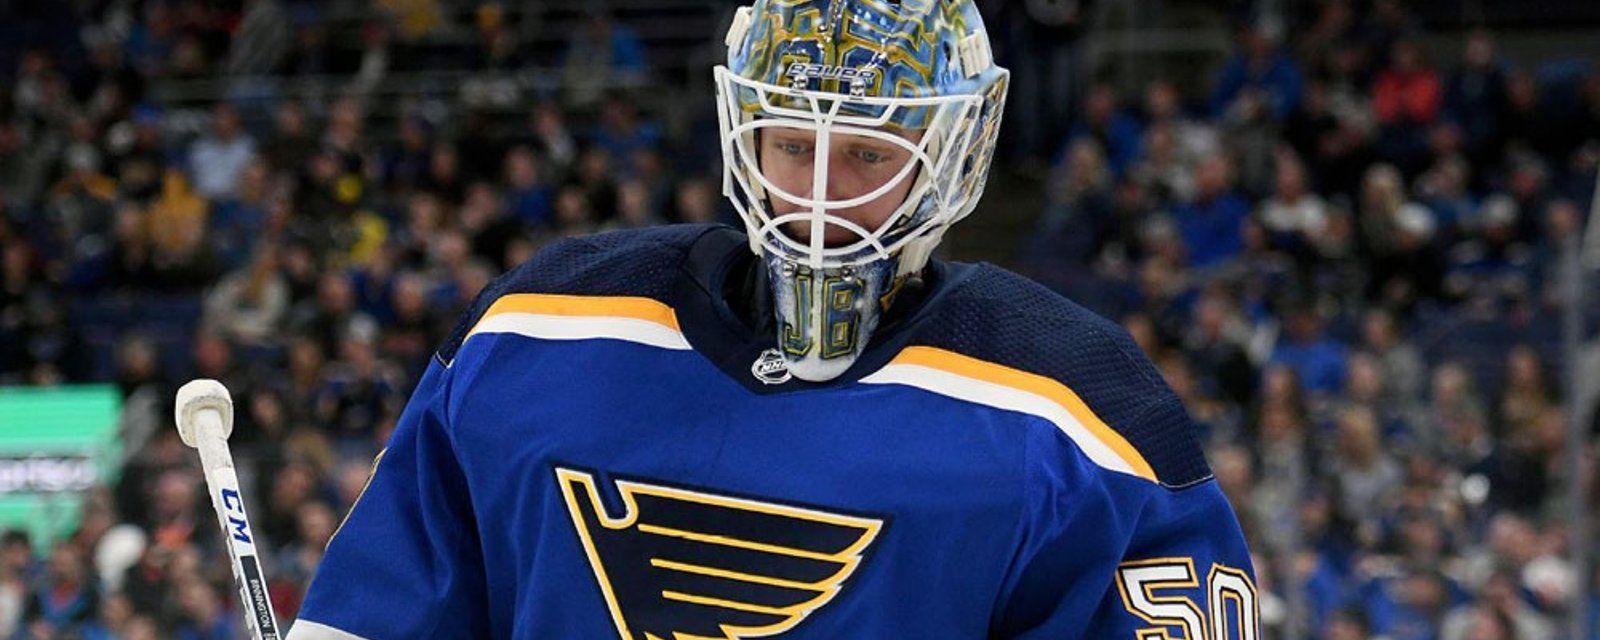 Binnington tells the story of how he basically told Martin Brodeur to “take a hike”